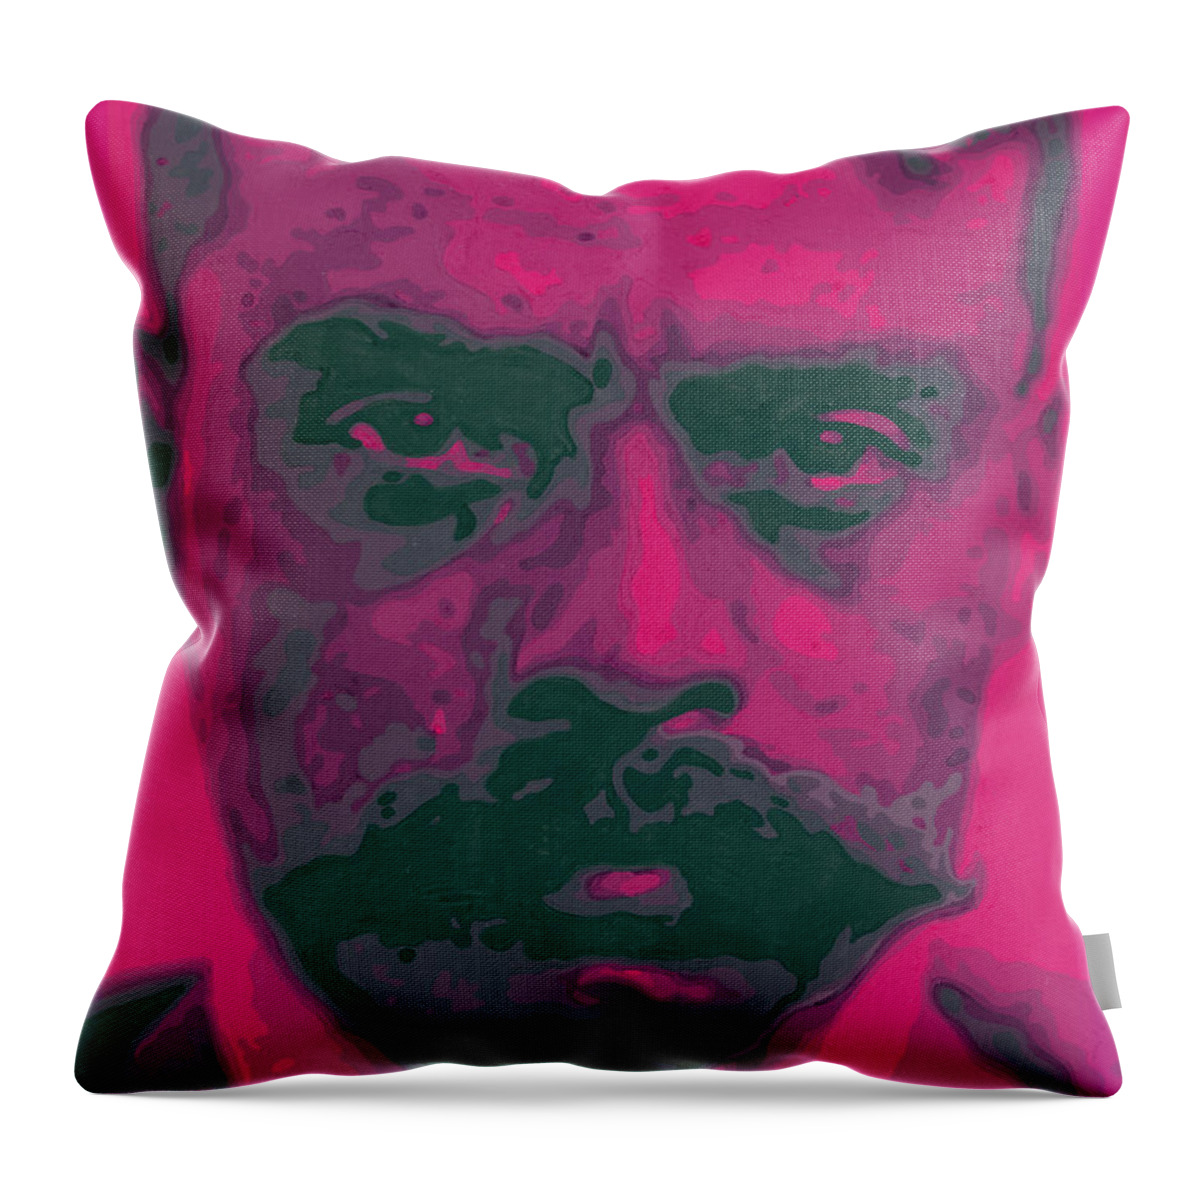 Emiliano Zapata Throw Pillow featuring the painting Zapata Intenso by Roberto Valdes Sanchez